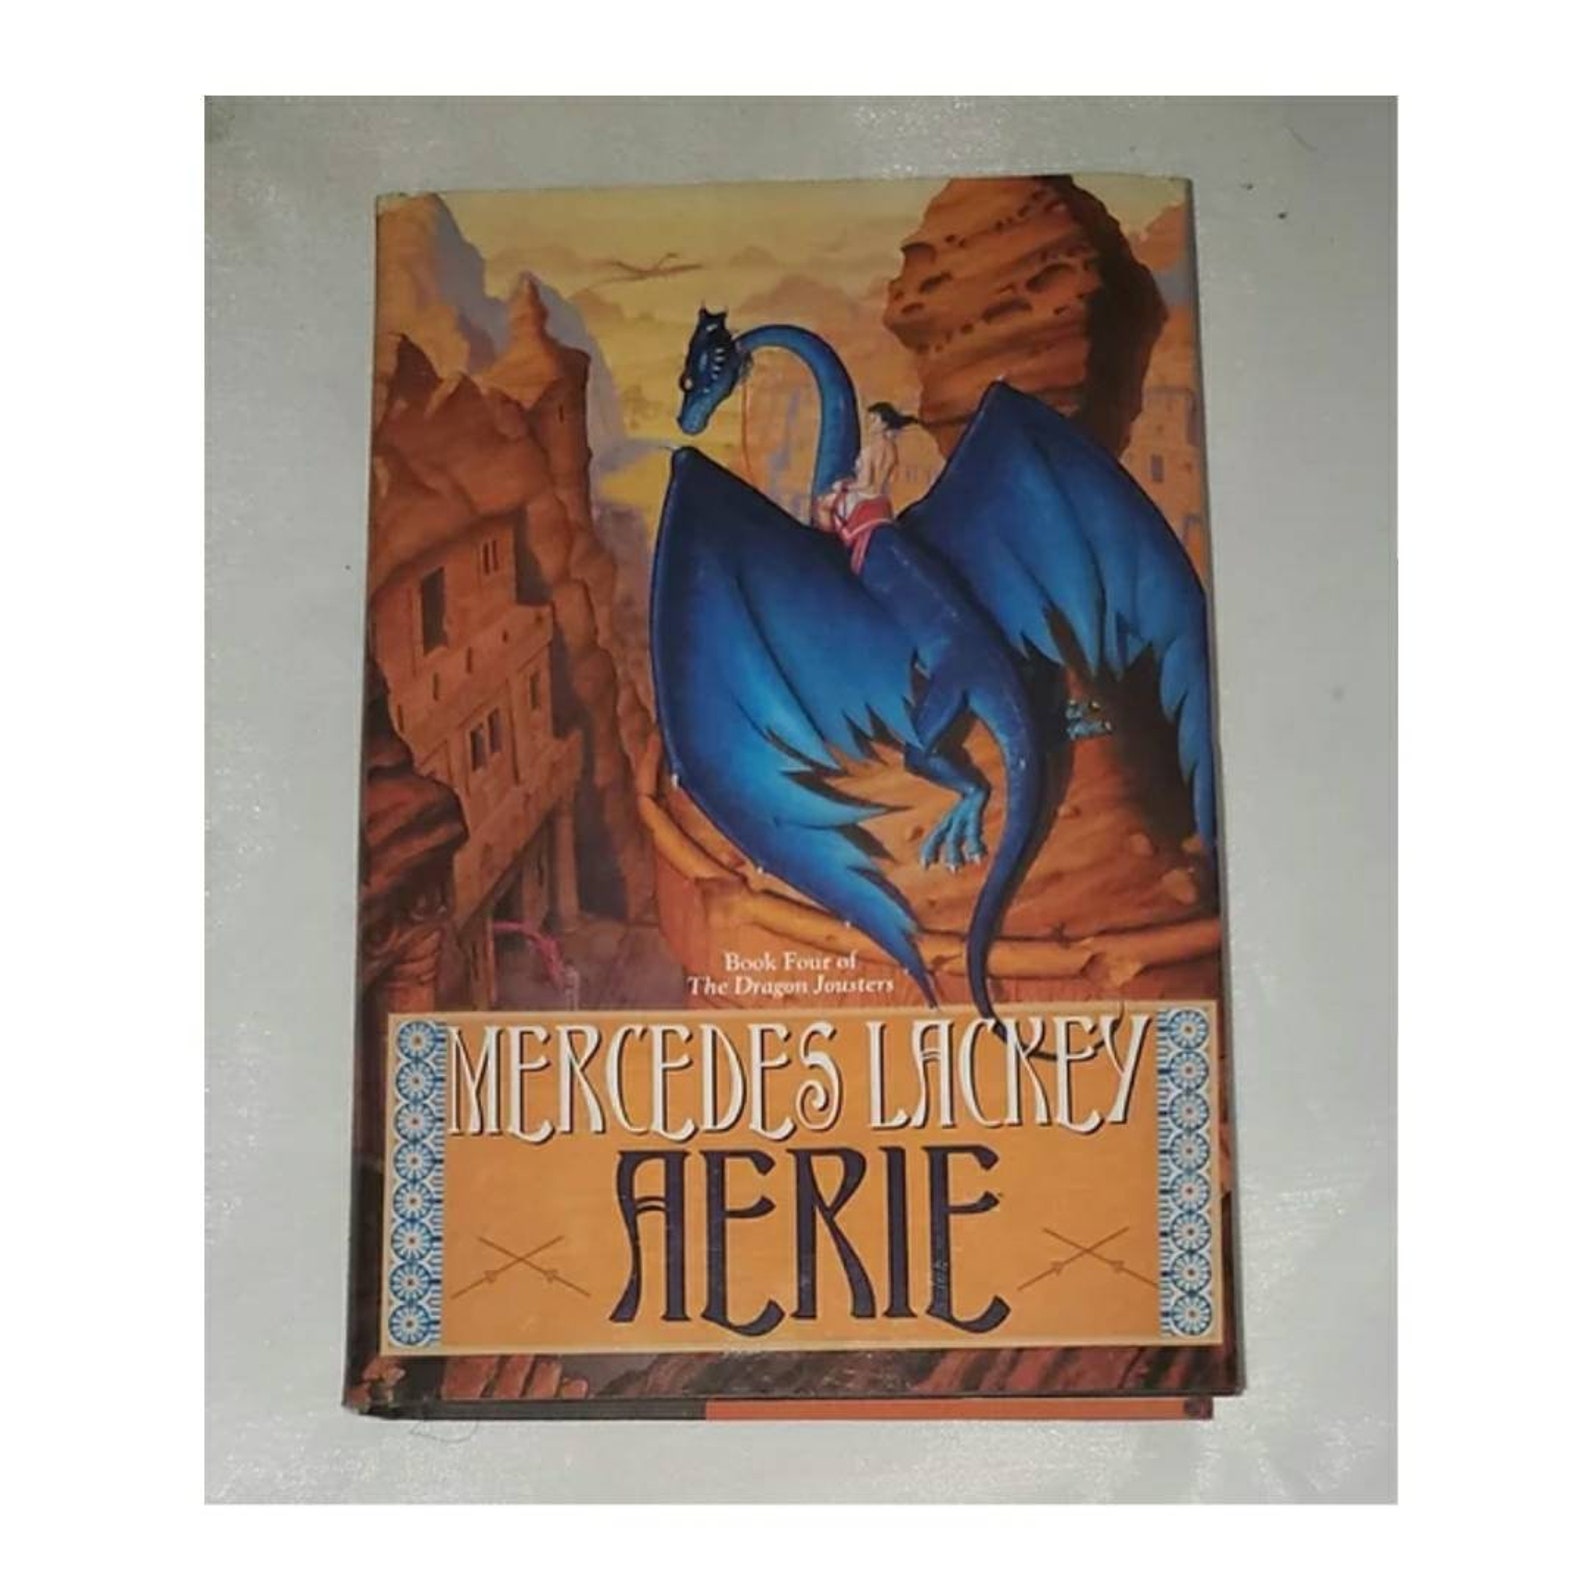 Aerie Book Four of The Dragon Jousters by Mercedes Lackey